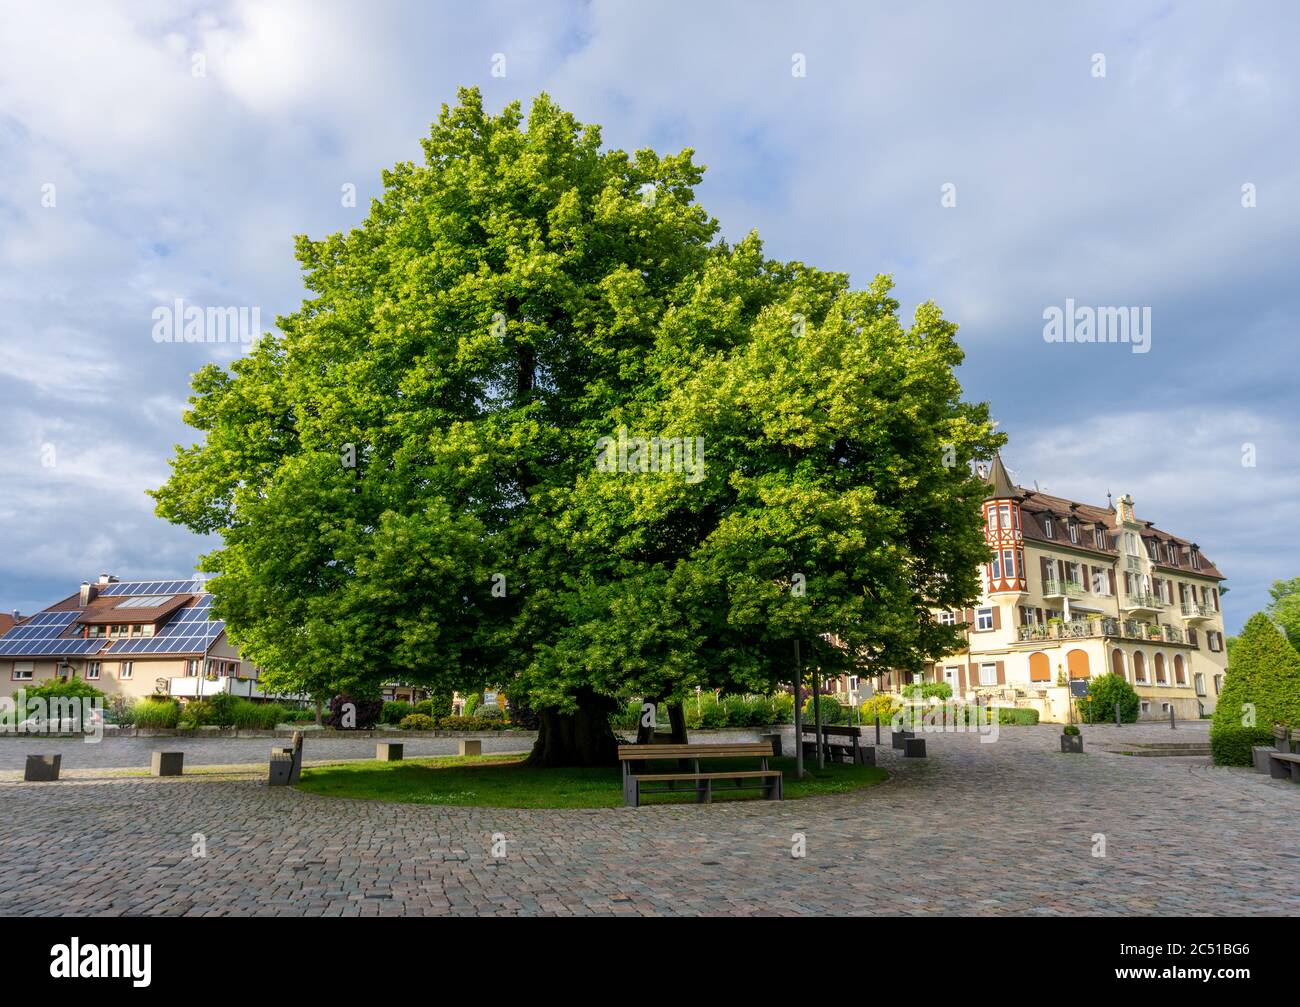 Heiligenberg, BW / Germany -  20 June 2020 : A view of the famous 12th century LINDEN tree in Heiligenberg used for executions in historical times Stock Photo